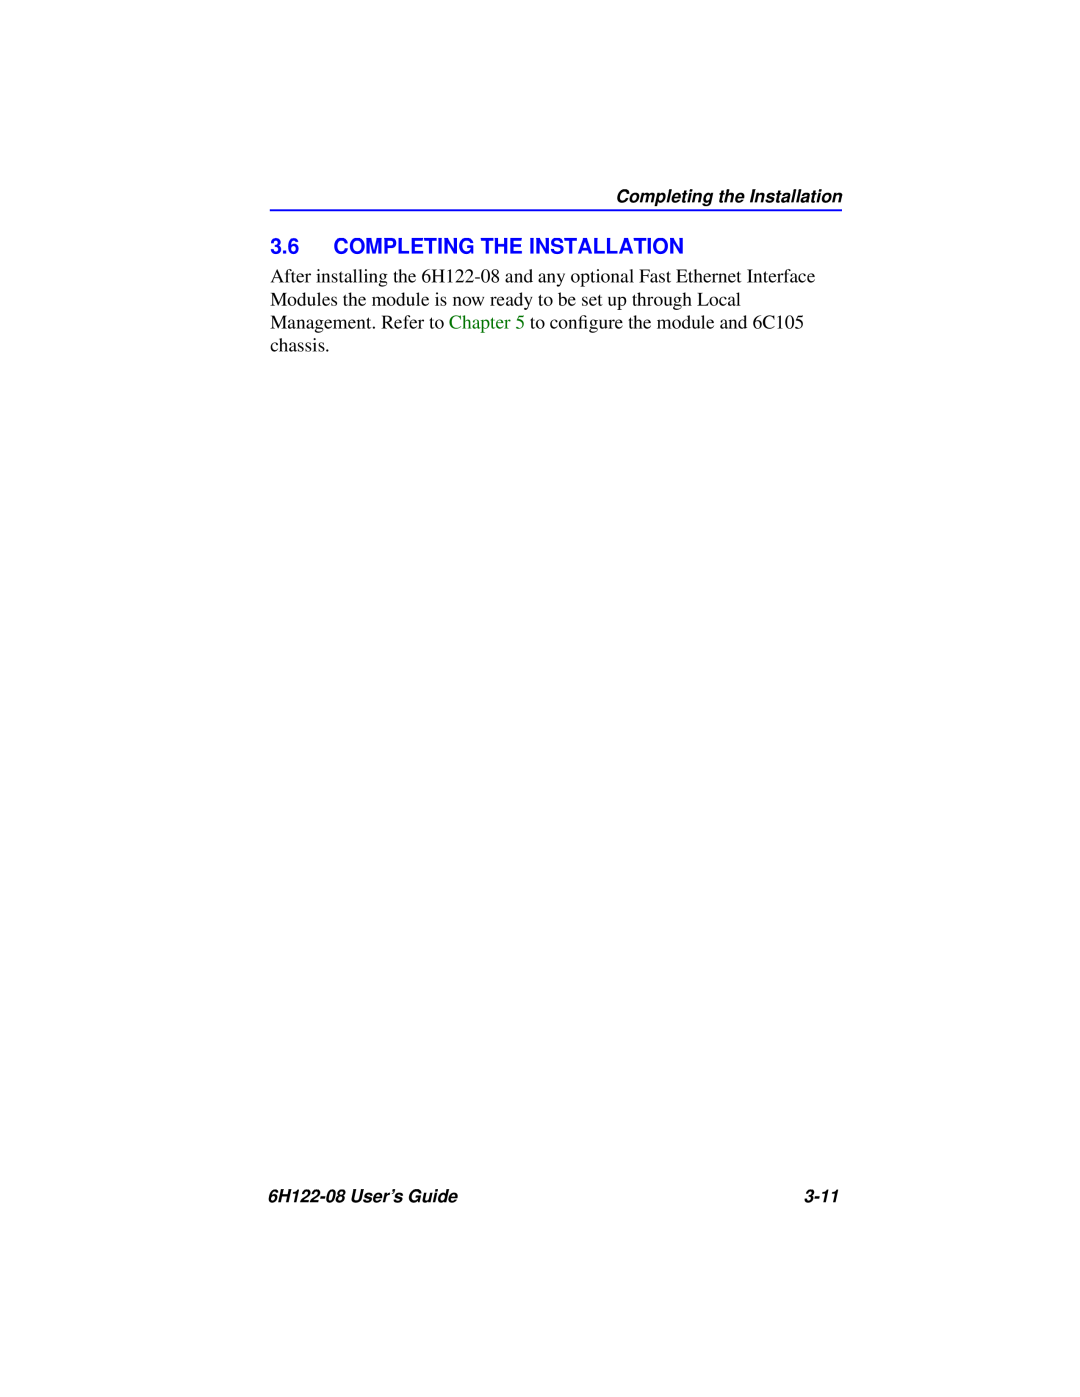 Cabletron Systems manual Completing The Installation, Completing the Installation, 6H122-08 User’s Guide, 3-11 